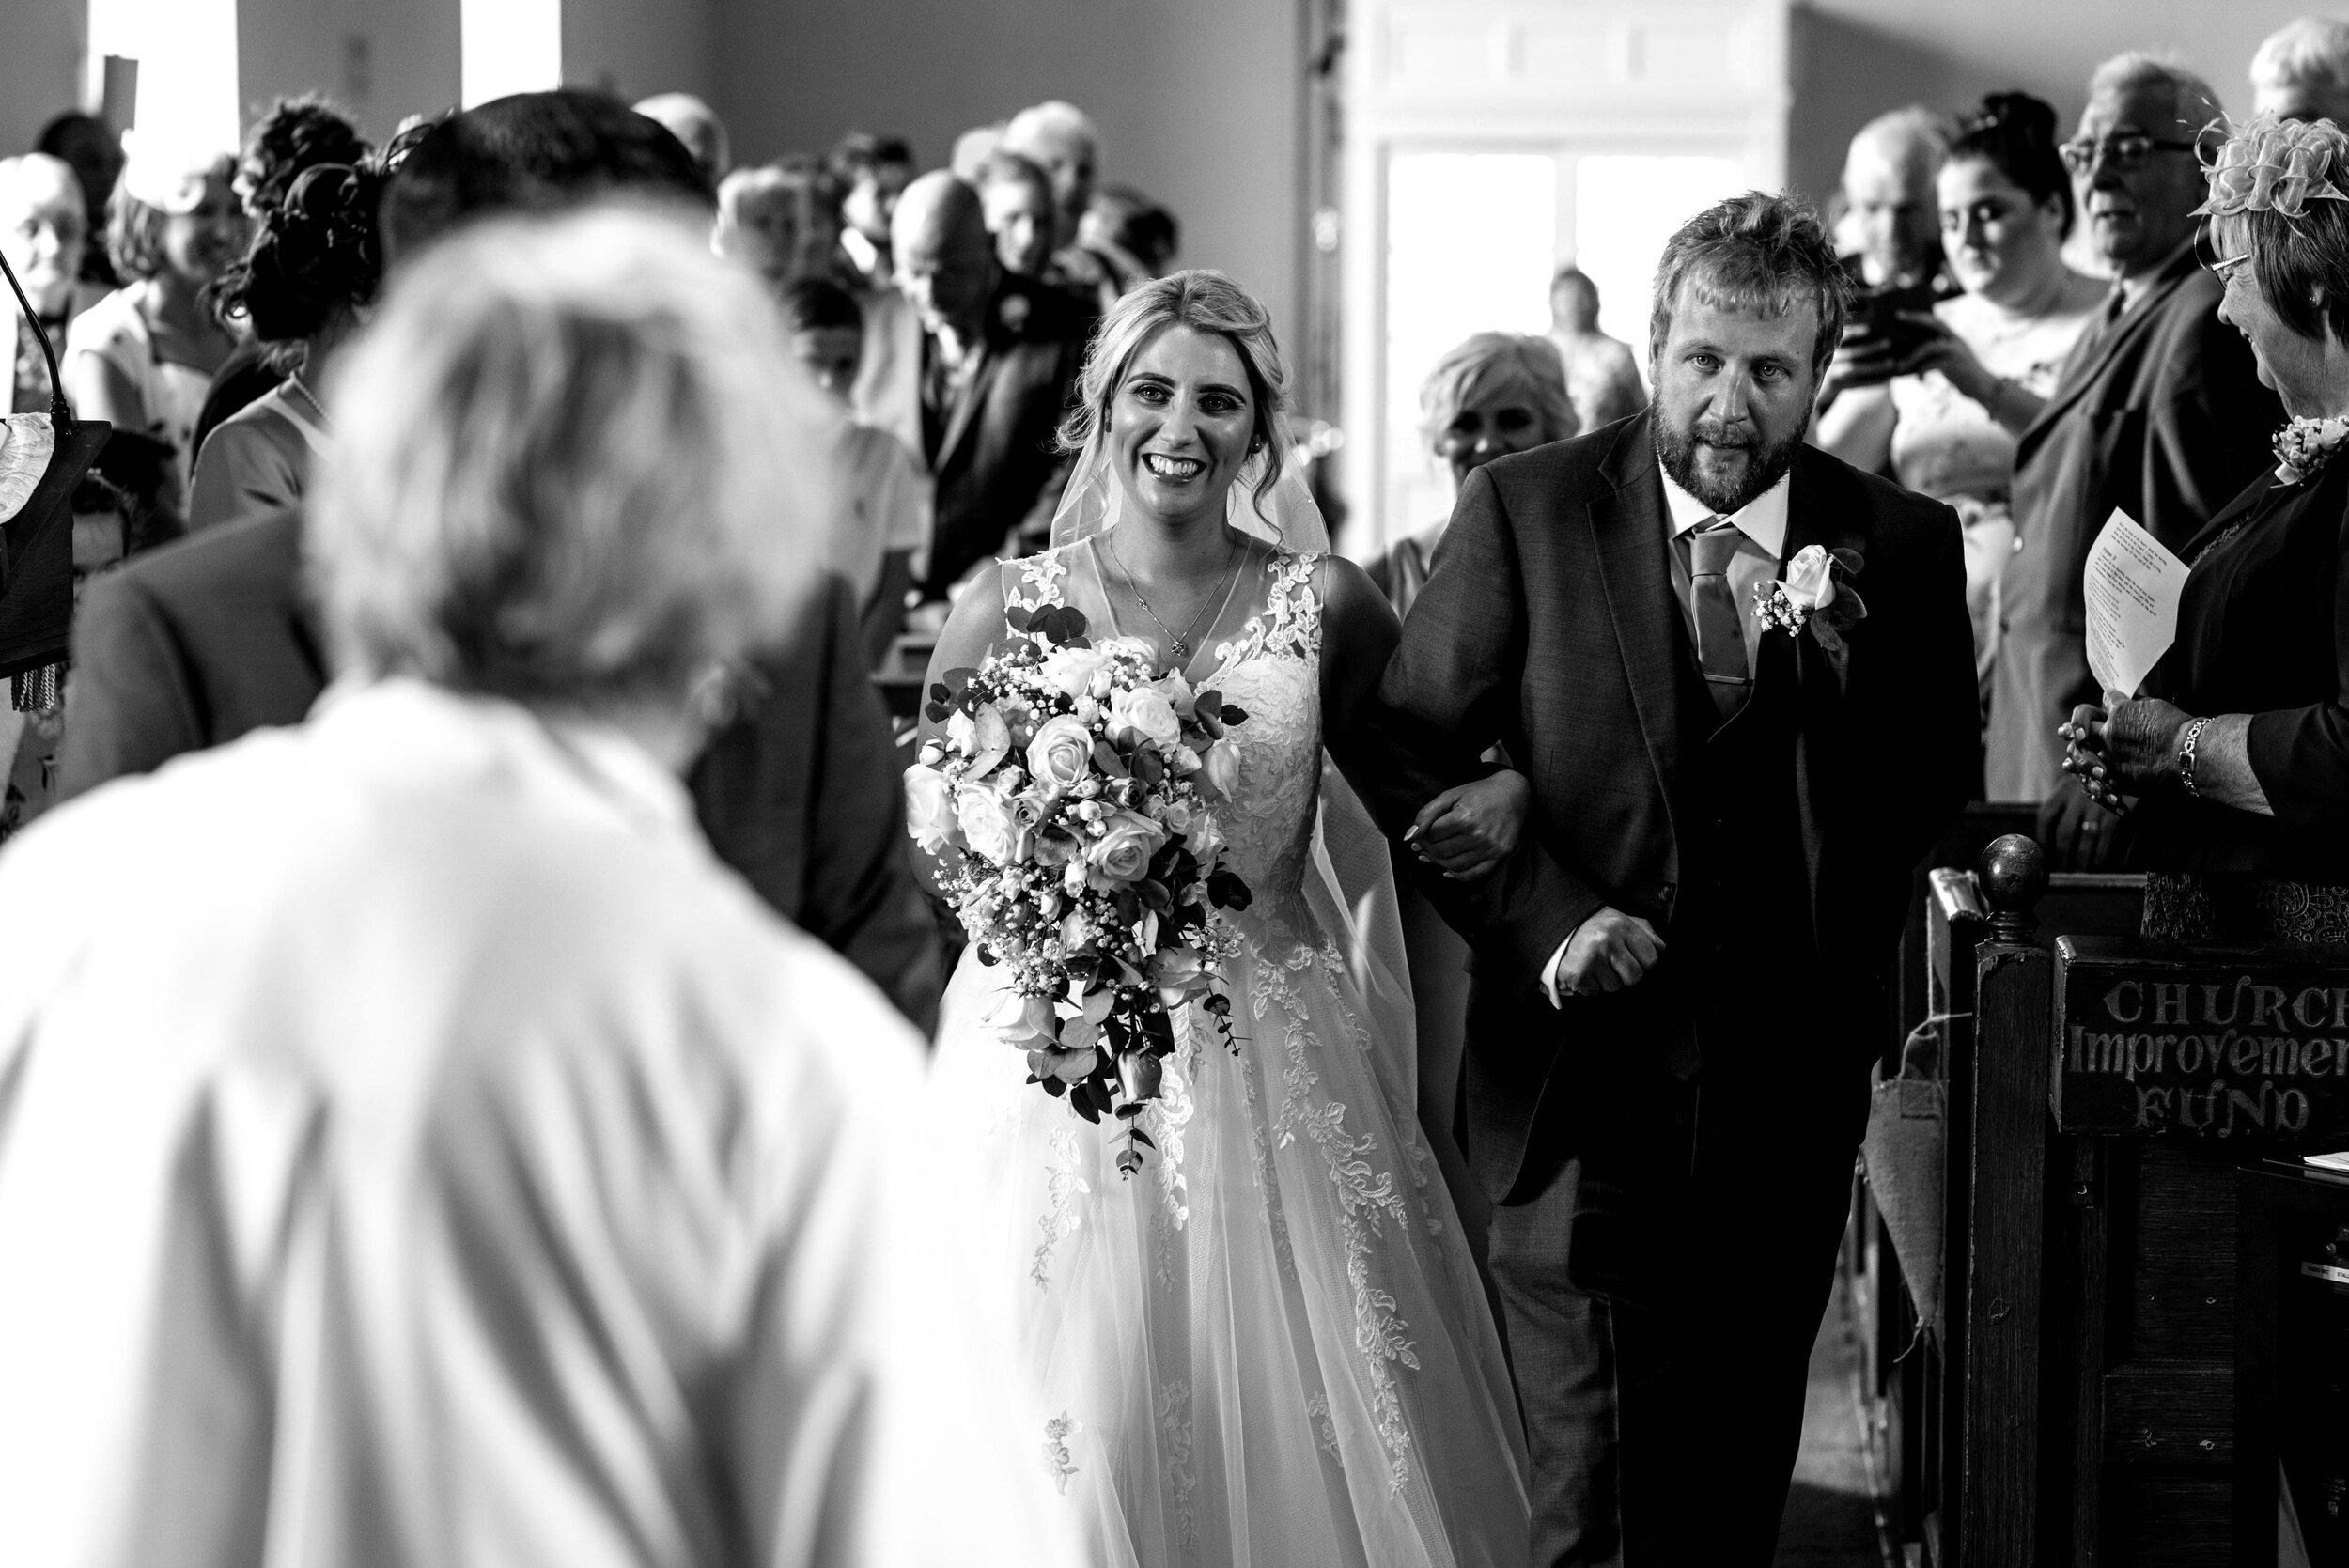 A very smily bride enters the church with her brother on her arm